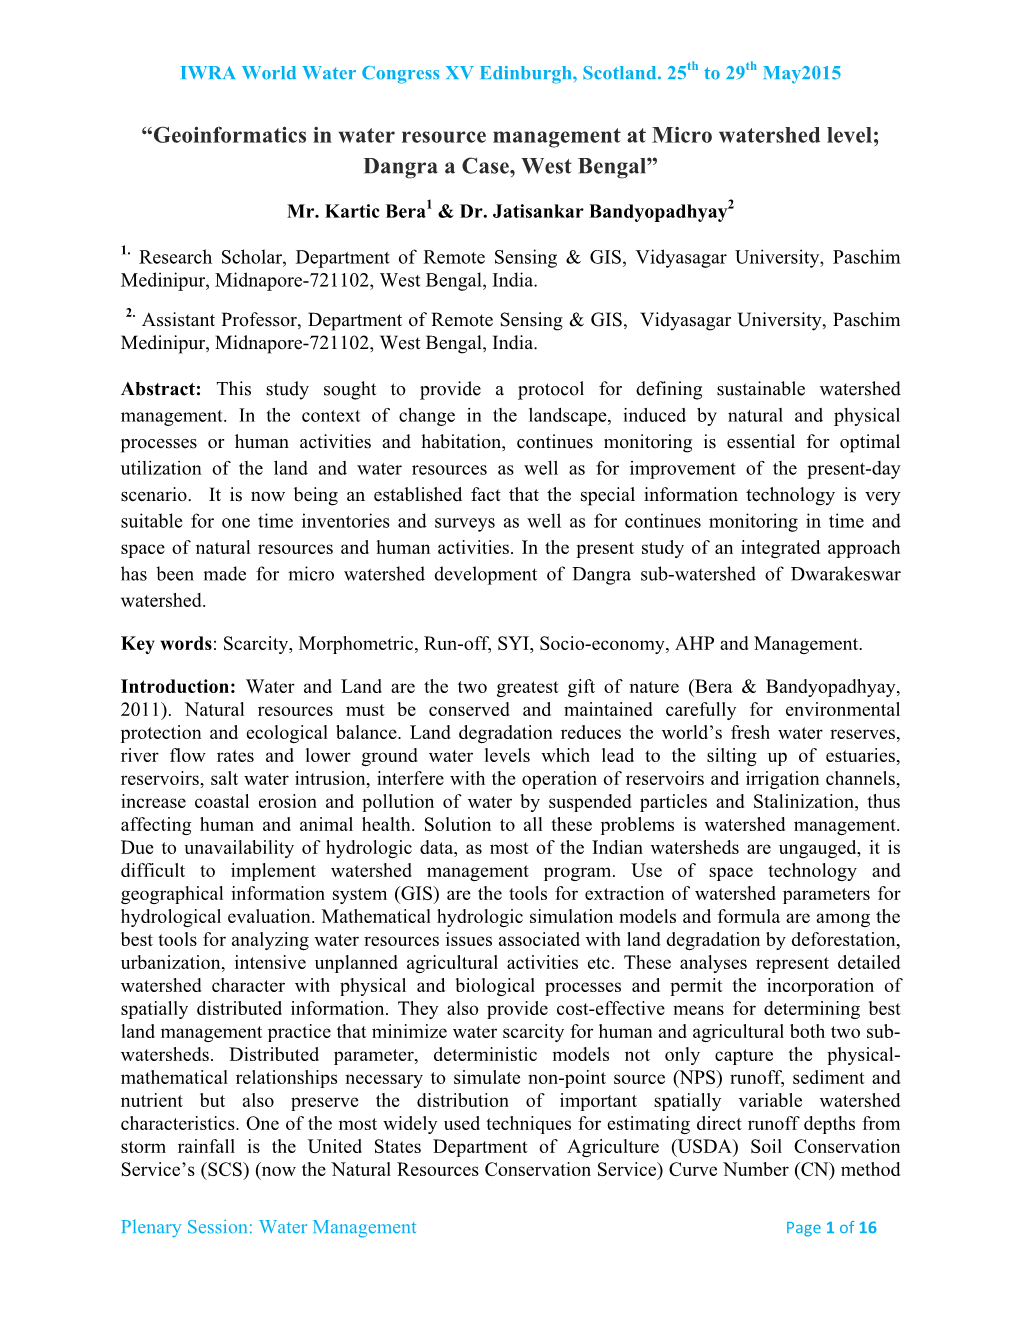 “Geoinformatics in Water Resource Management at Micro Watershed Level; Dangra a Case, West Bengal”